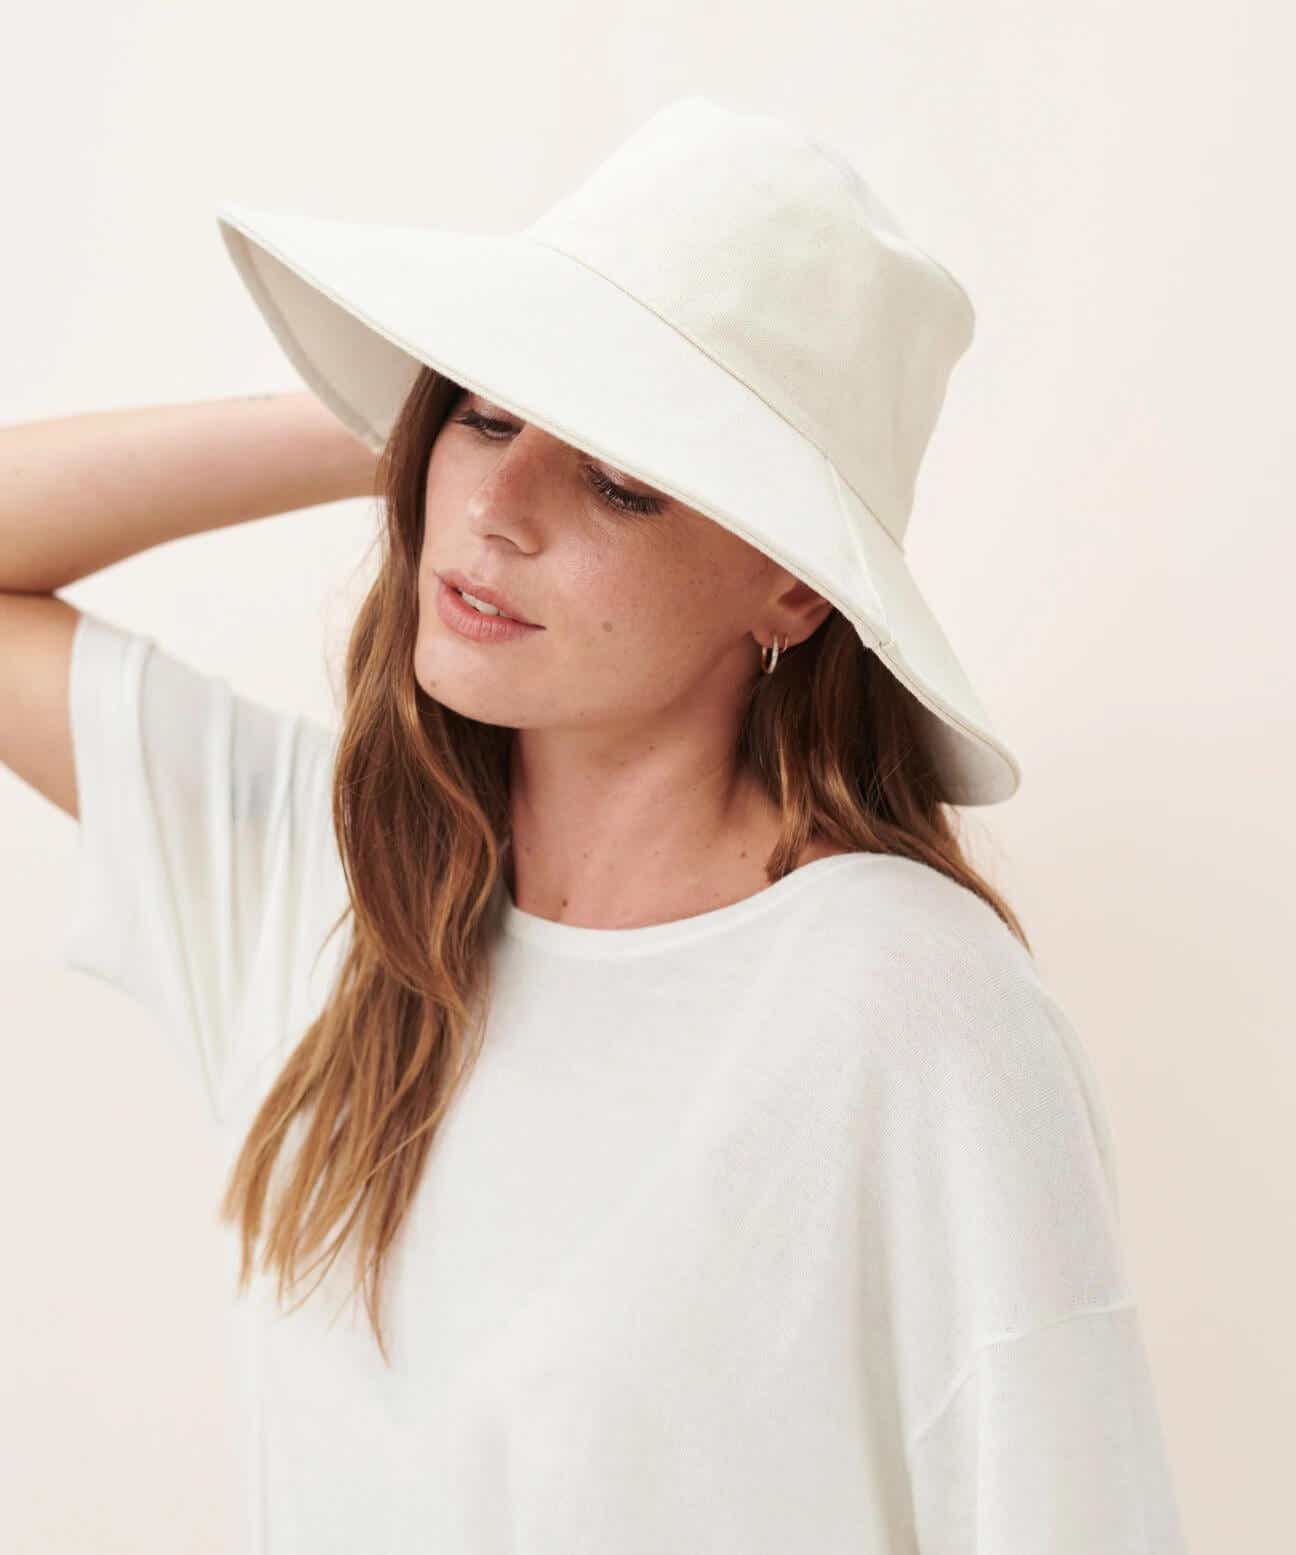 15 Best Sun Hats for Women for Summer 2022 - Stylish Hats for Summer